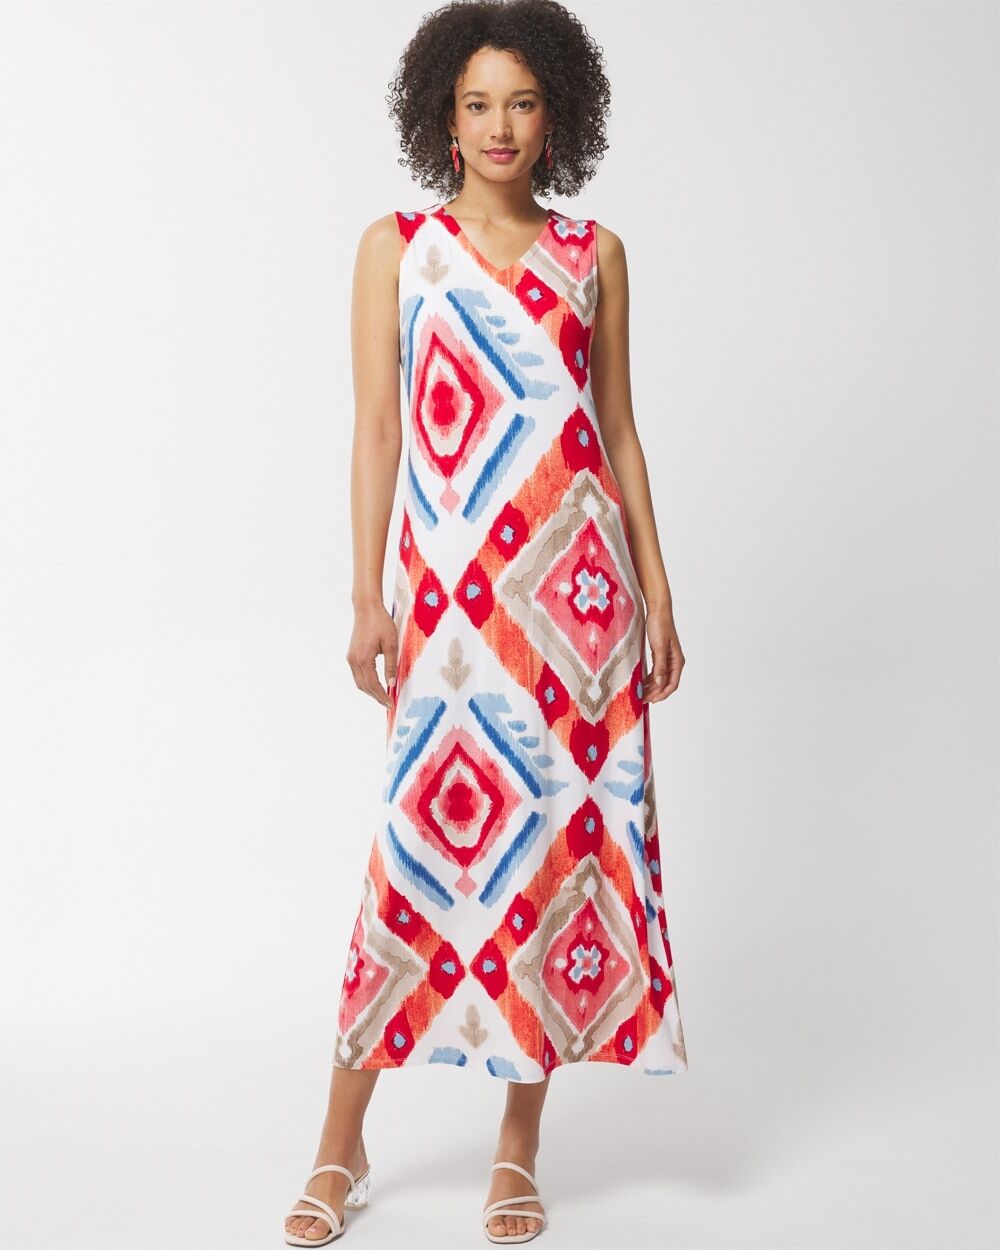 Chico's Off The Rack Women's Exploded Ikat Maxi Dress in Hot Pepper Size 12/14   Chico's Outlet, Spring Dresses - Hot Pepper - Women - Size: 12/14